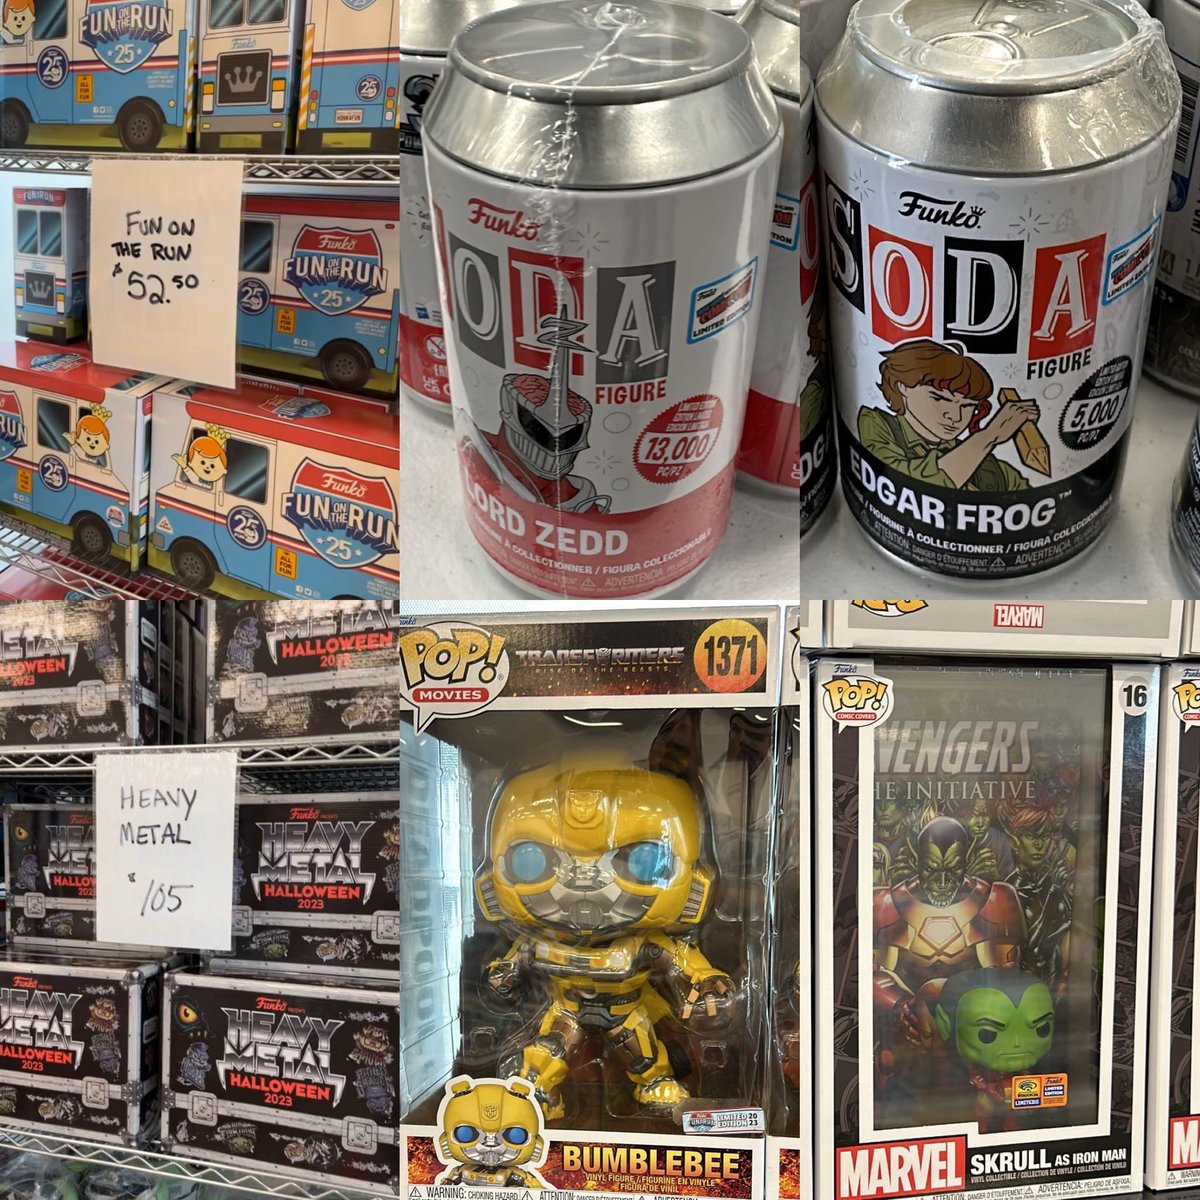 Here’s a look at some of the Funko Buckeye Warehouse finds! Did you go to the warehouse sale? . Credit @wantedcollectables #Funko #FunkoPop #FunkoPopVinyl #Pop #PopVinyl #Collectibles #Collectible #FunkoCollector #FunkoPops #Collector #Toy #Toys #DisTrackers